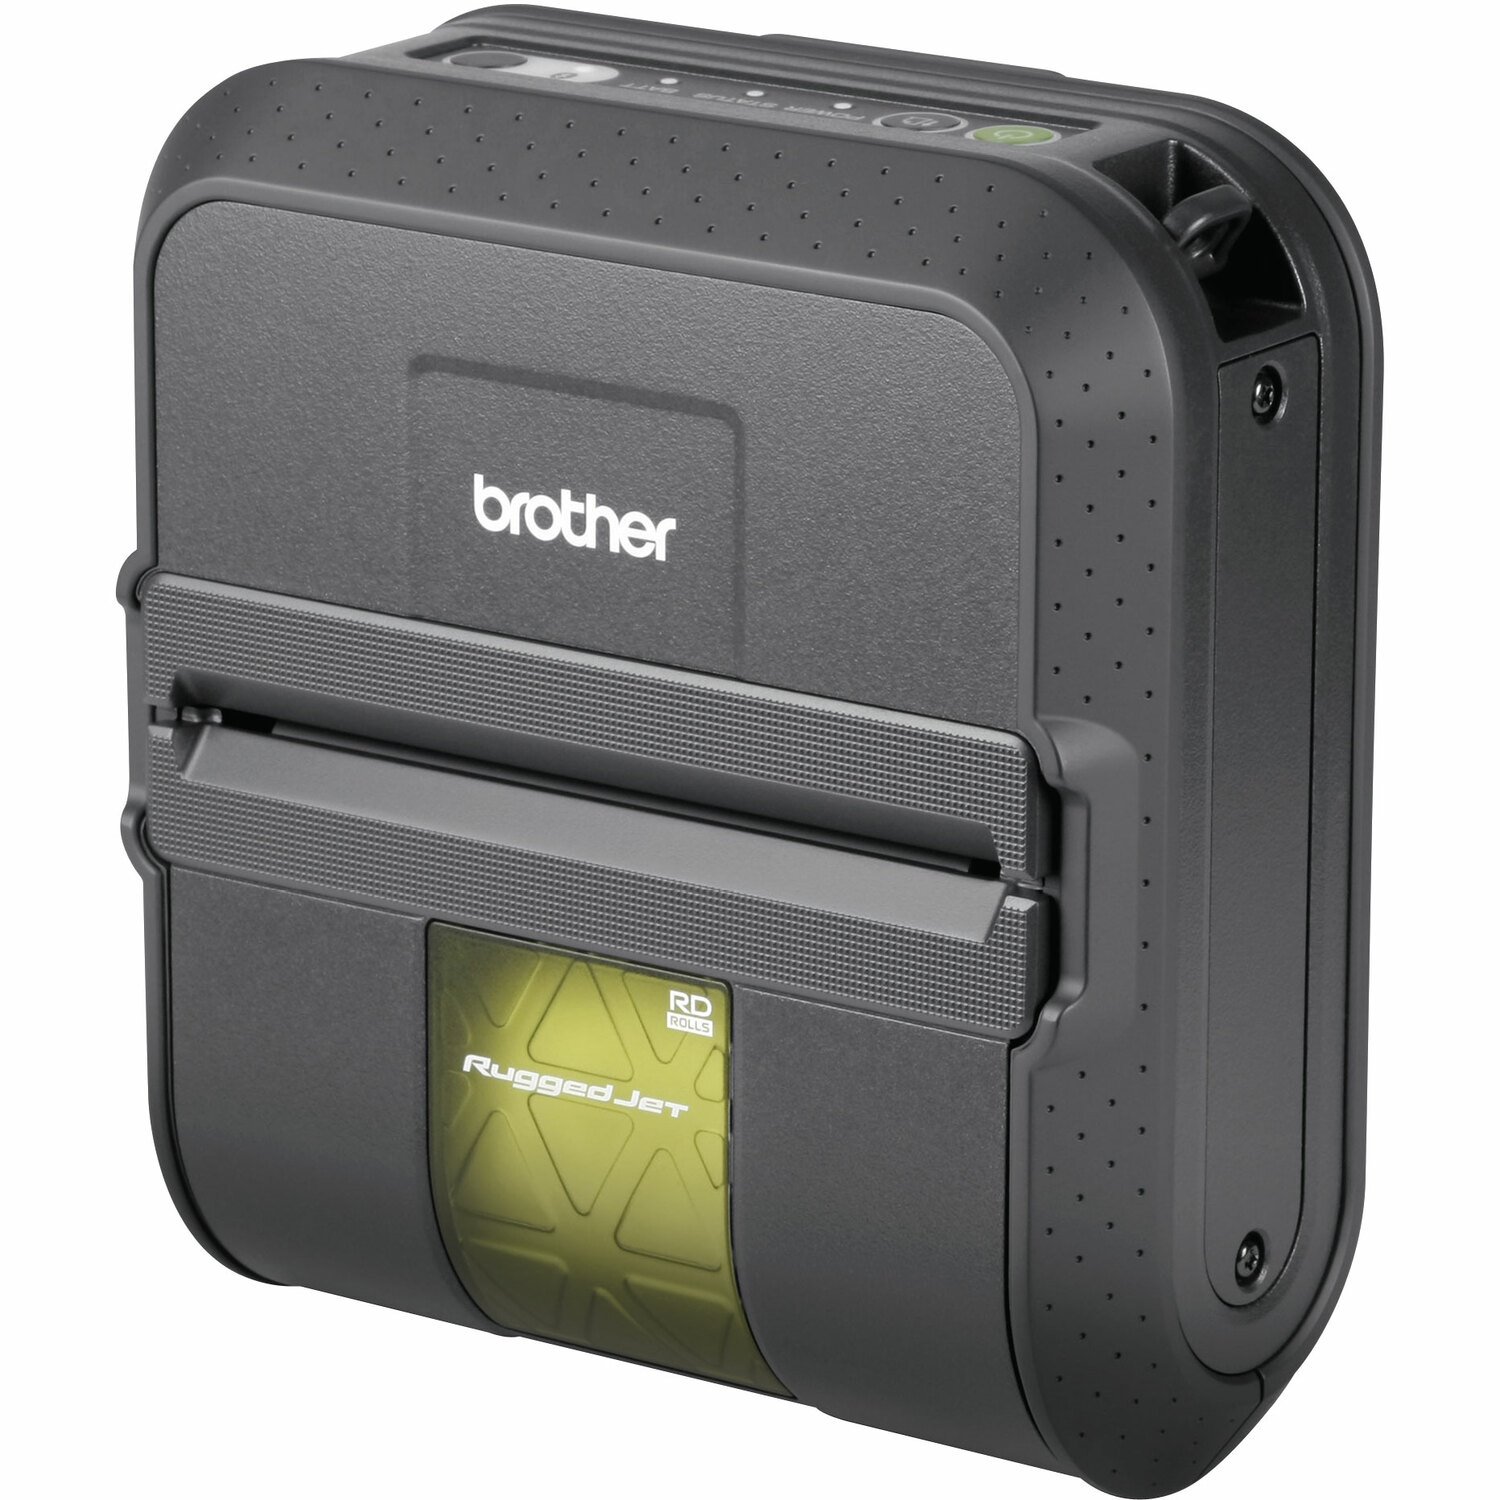 Brother RuggedJet RJ4030 Direct Thermal Printer - Monochrome - Portable - Label Print - USB - Serial - Bluetooth - Battery Included